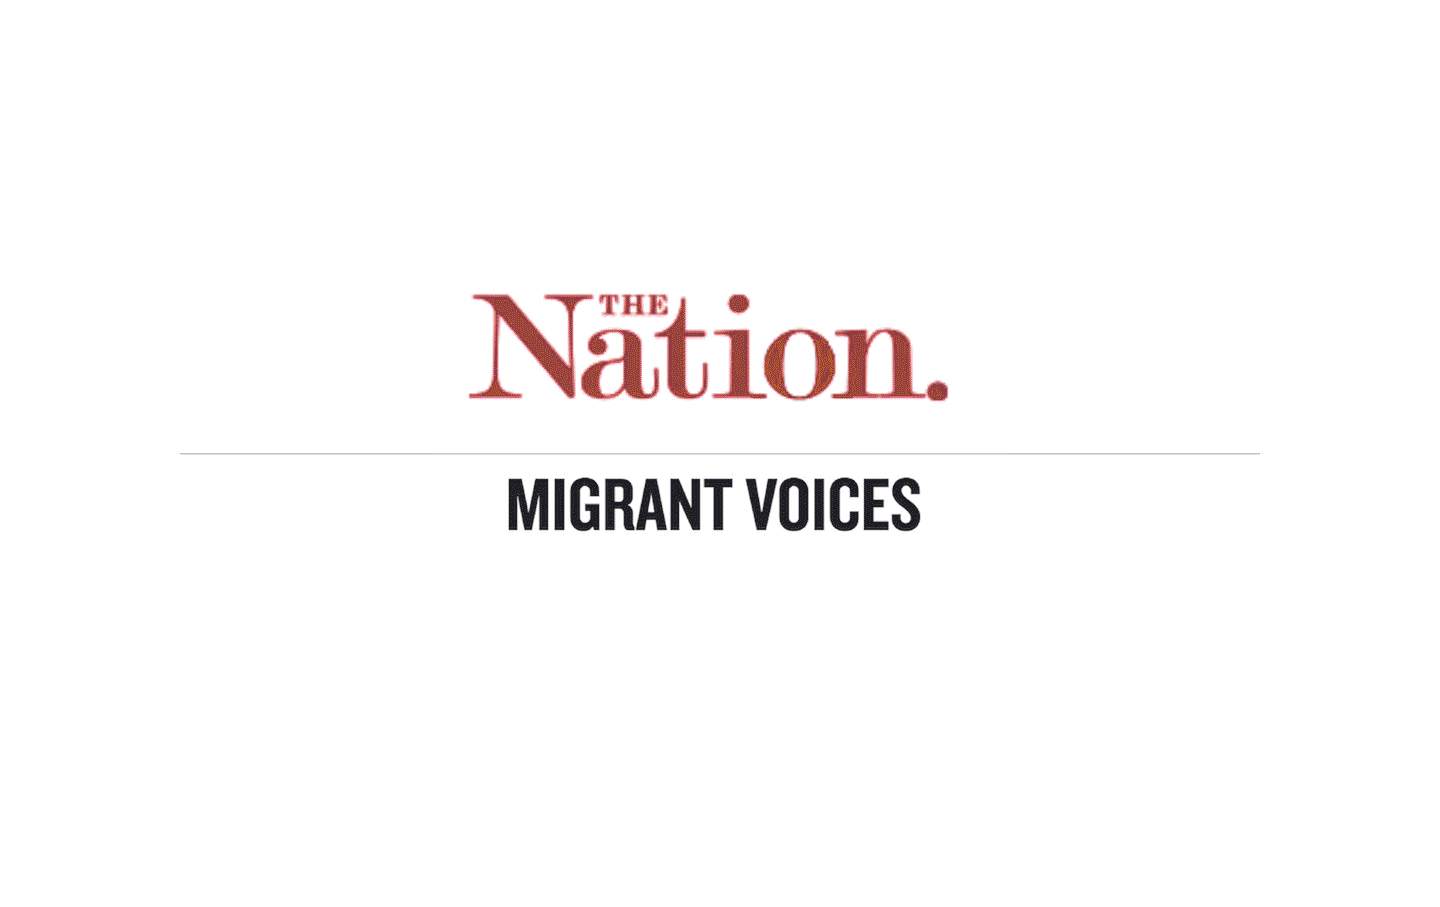 Migrant Voices for The Nation